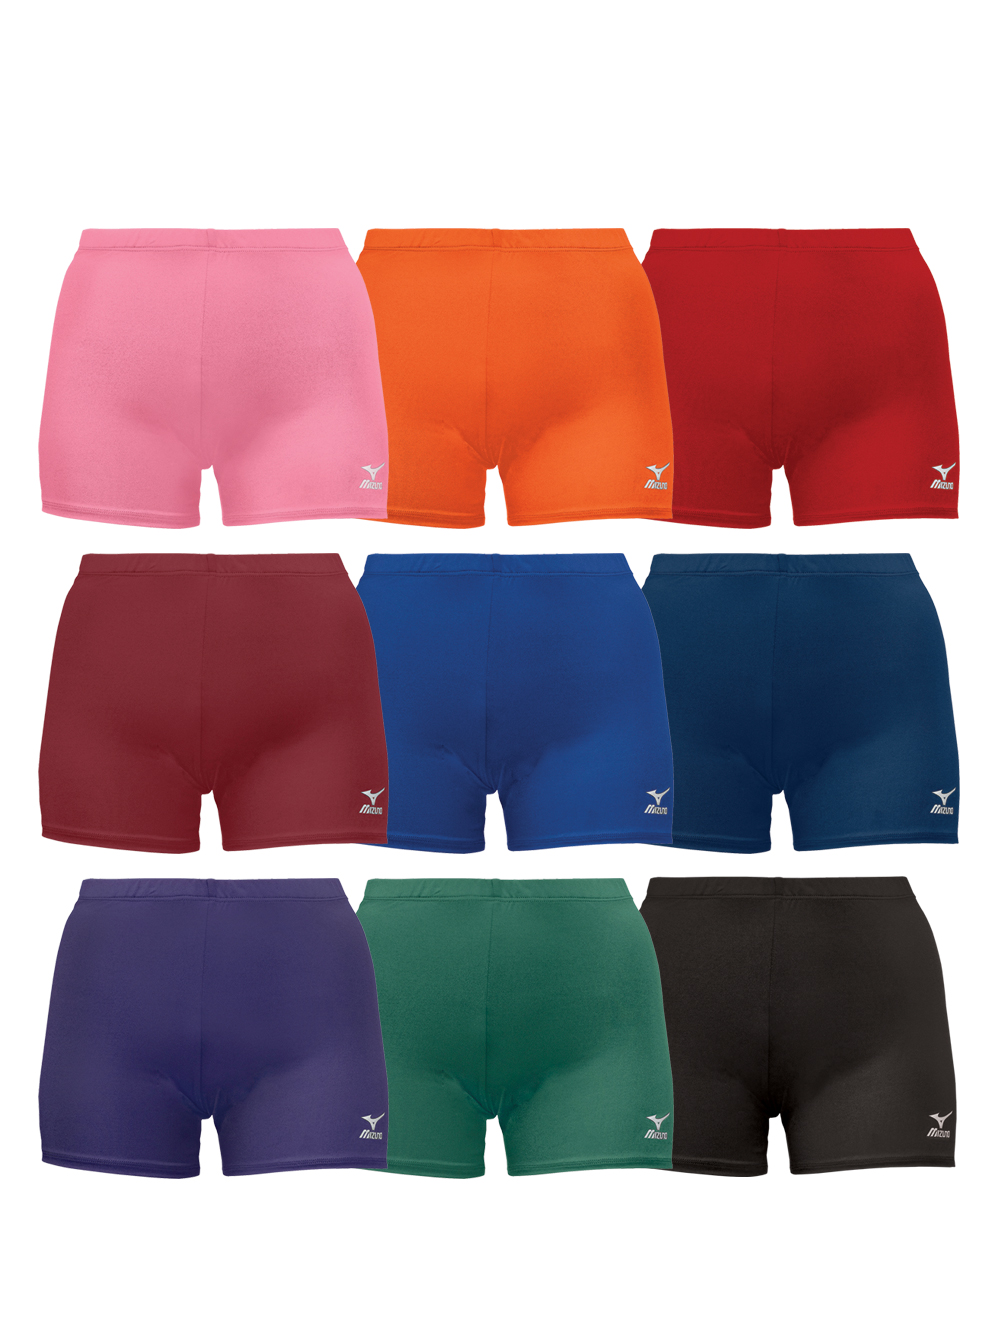 mizuno low rise volleyball shorts